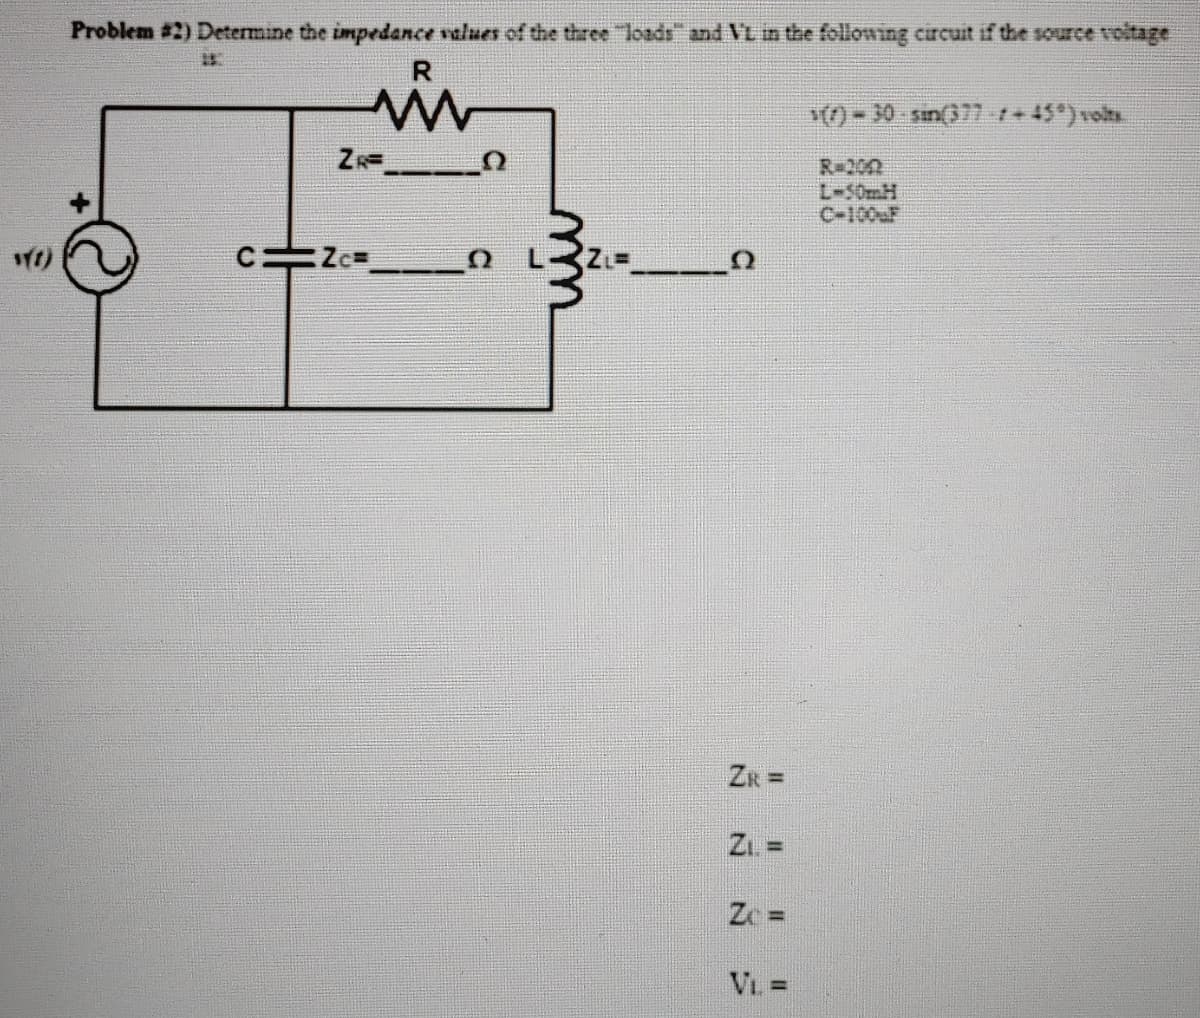 Problem #2) Determine the impedance values of the three "loads" and VL in the following circuit if the source voltage
153
R
www
ZR=
C=Zc
Ω
ZI.=
Zc=
VL =
(7) - 30-sin(377 -:+45°) volts.
L-50mH
C-100 F